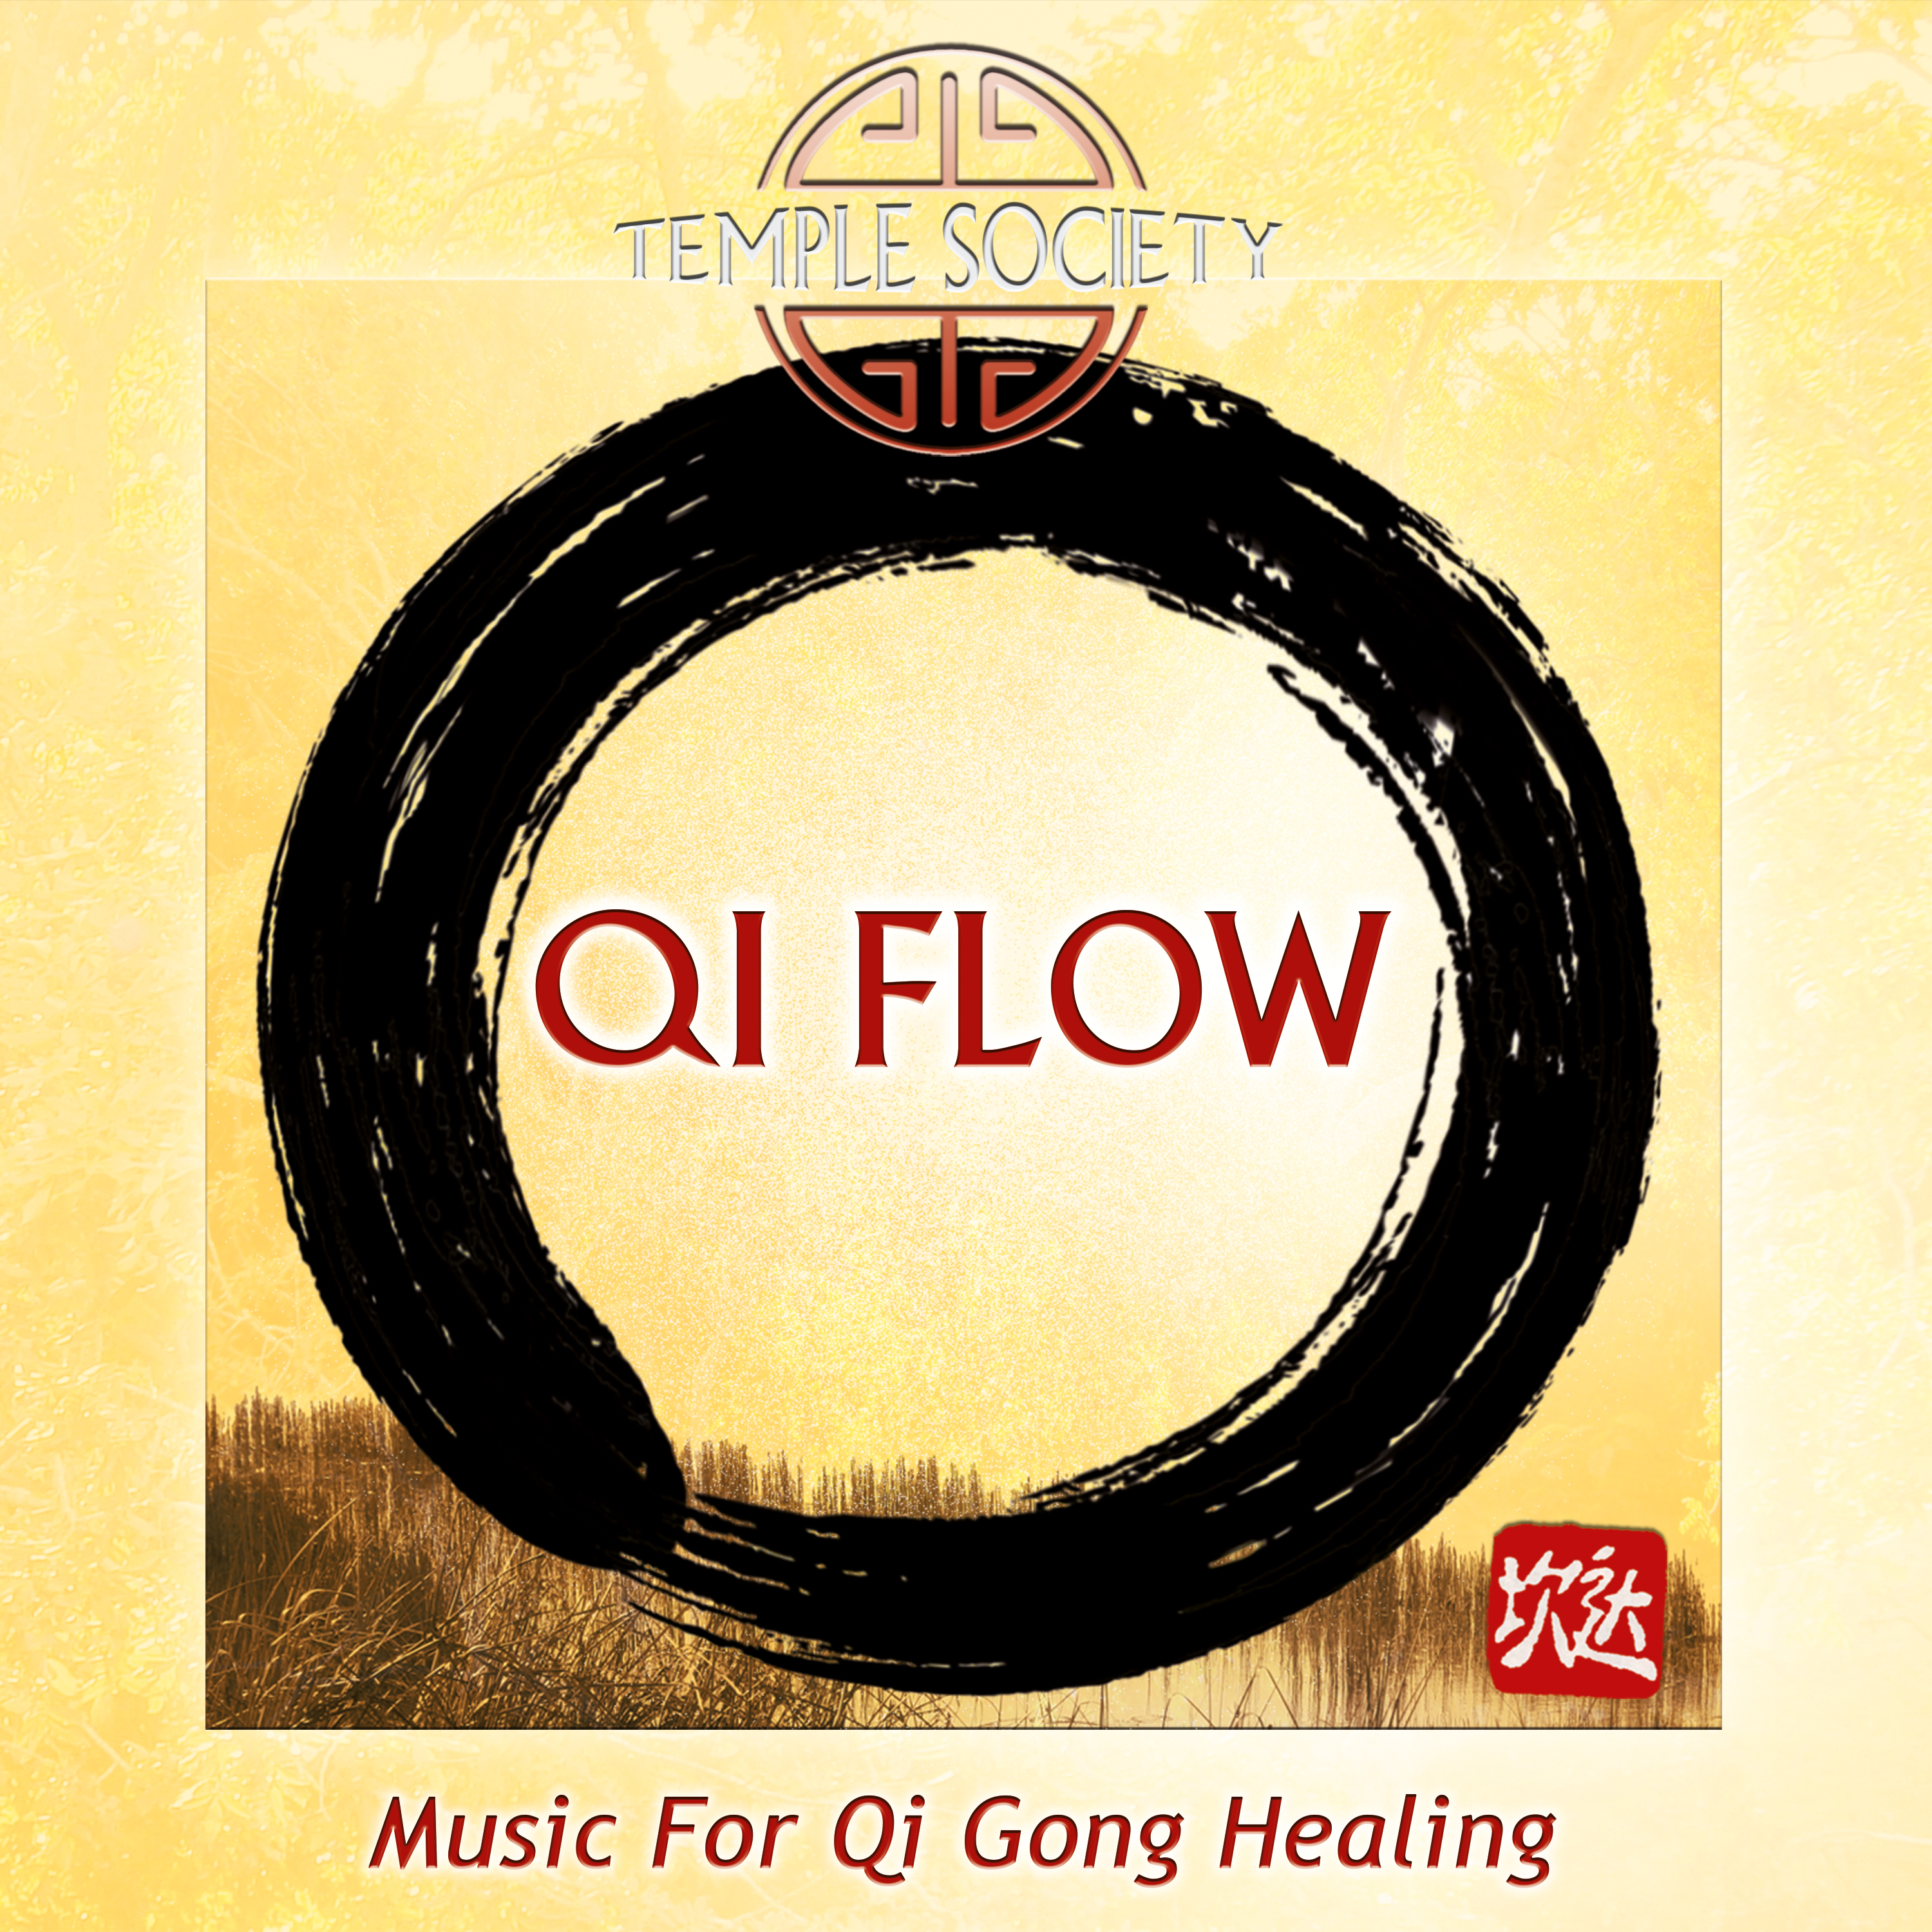 Qi Flow by Temple Society